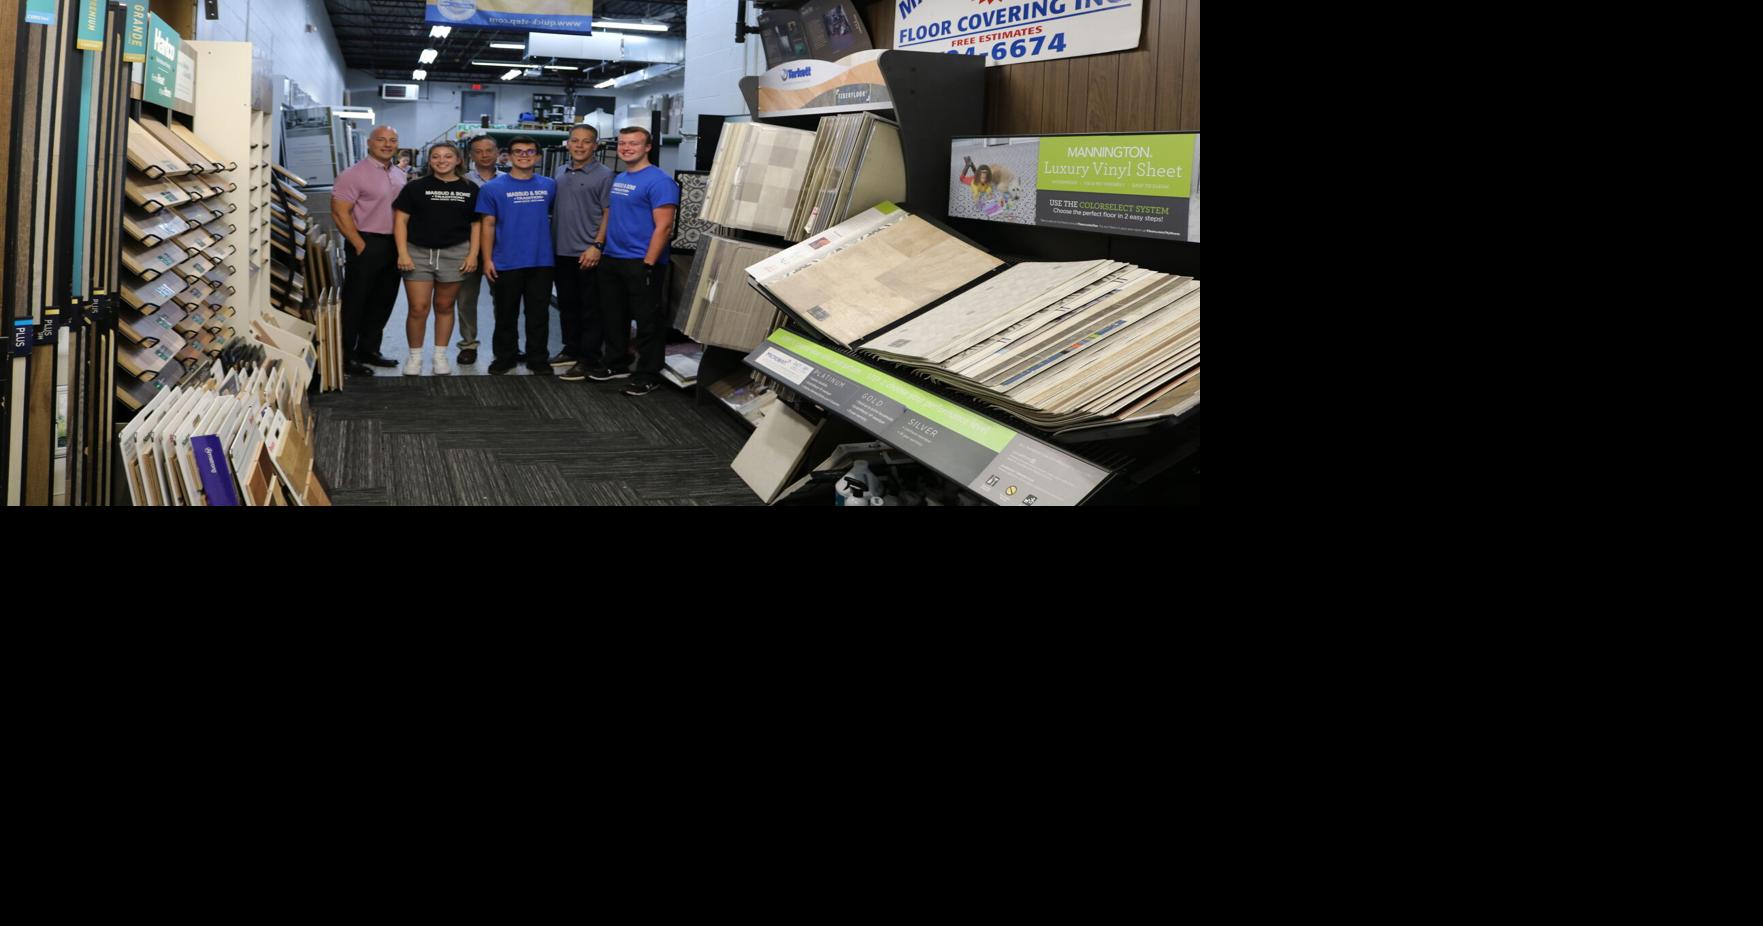 Massud & Sons Floor Covering celebrates 50 years of family business | News